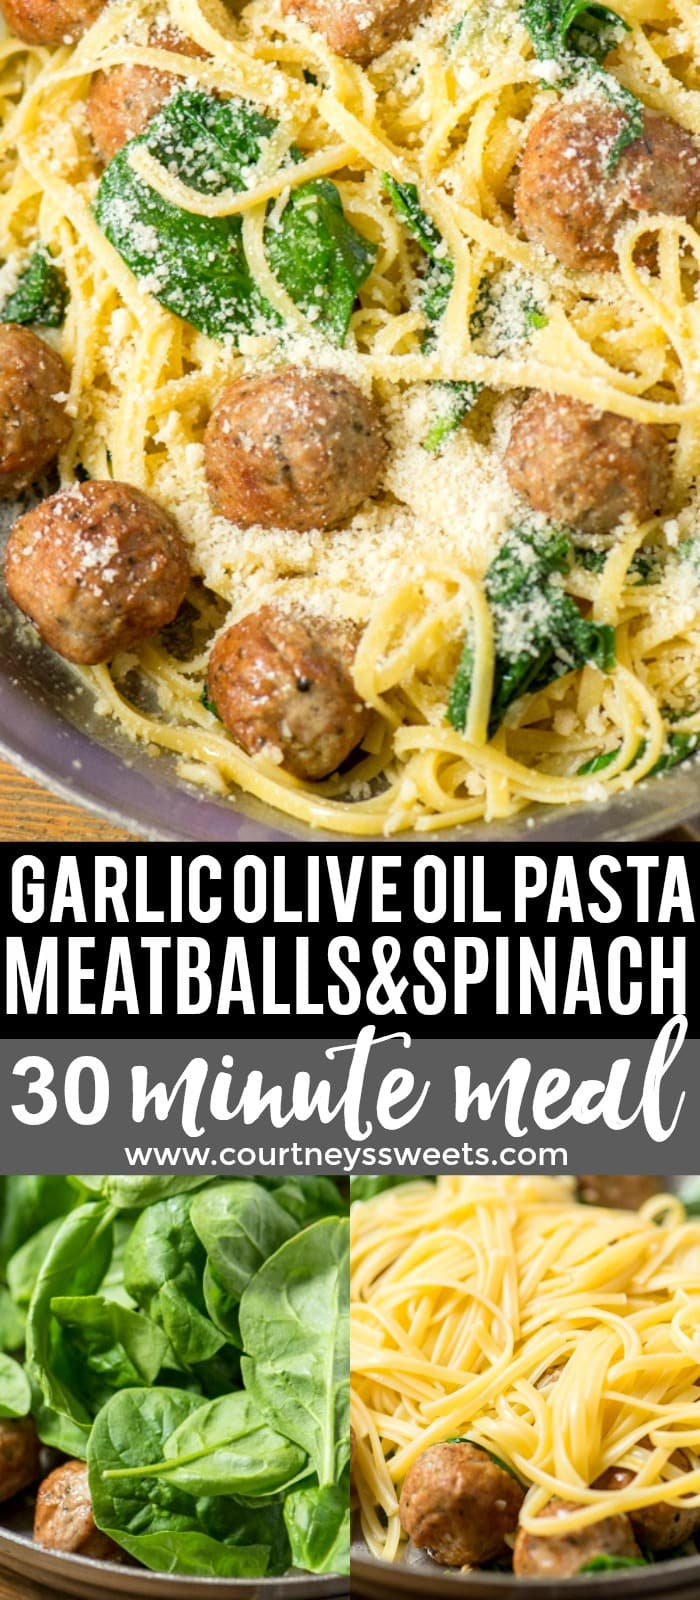 Garlic Olive Oil Pasta with Meatballs and Spinach is a delicious pasta recipe without red sauce. Serve up this filling and satisfying meal in less than 30 minutes!